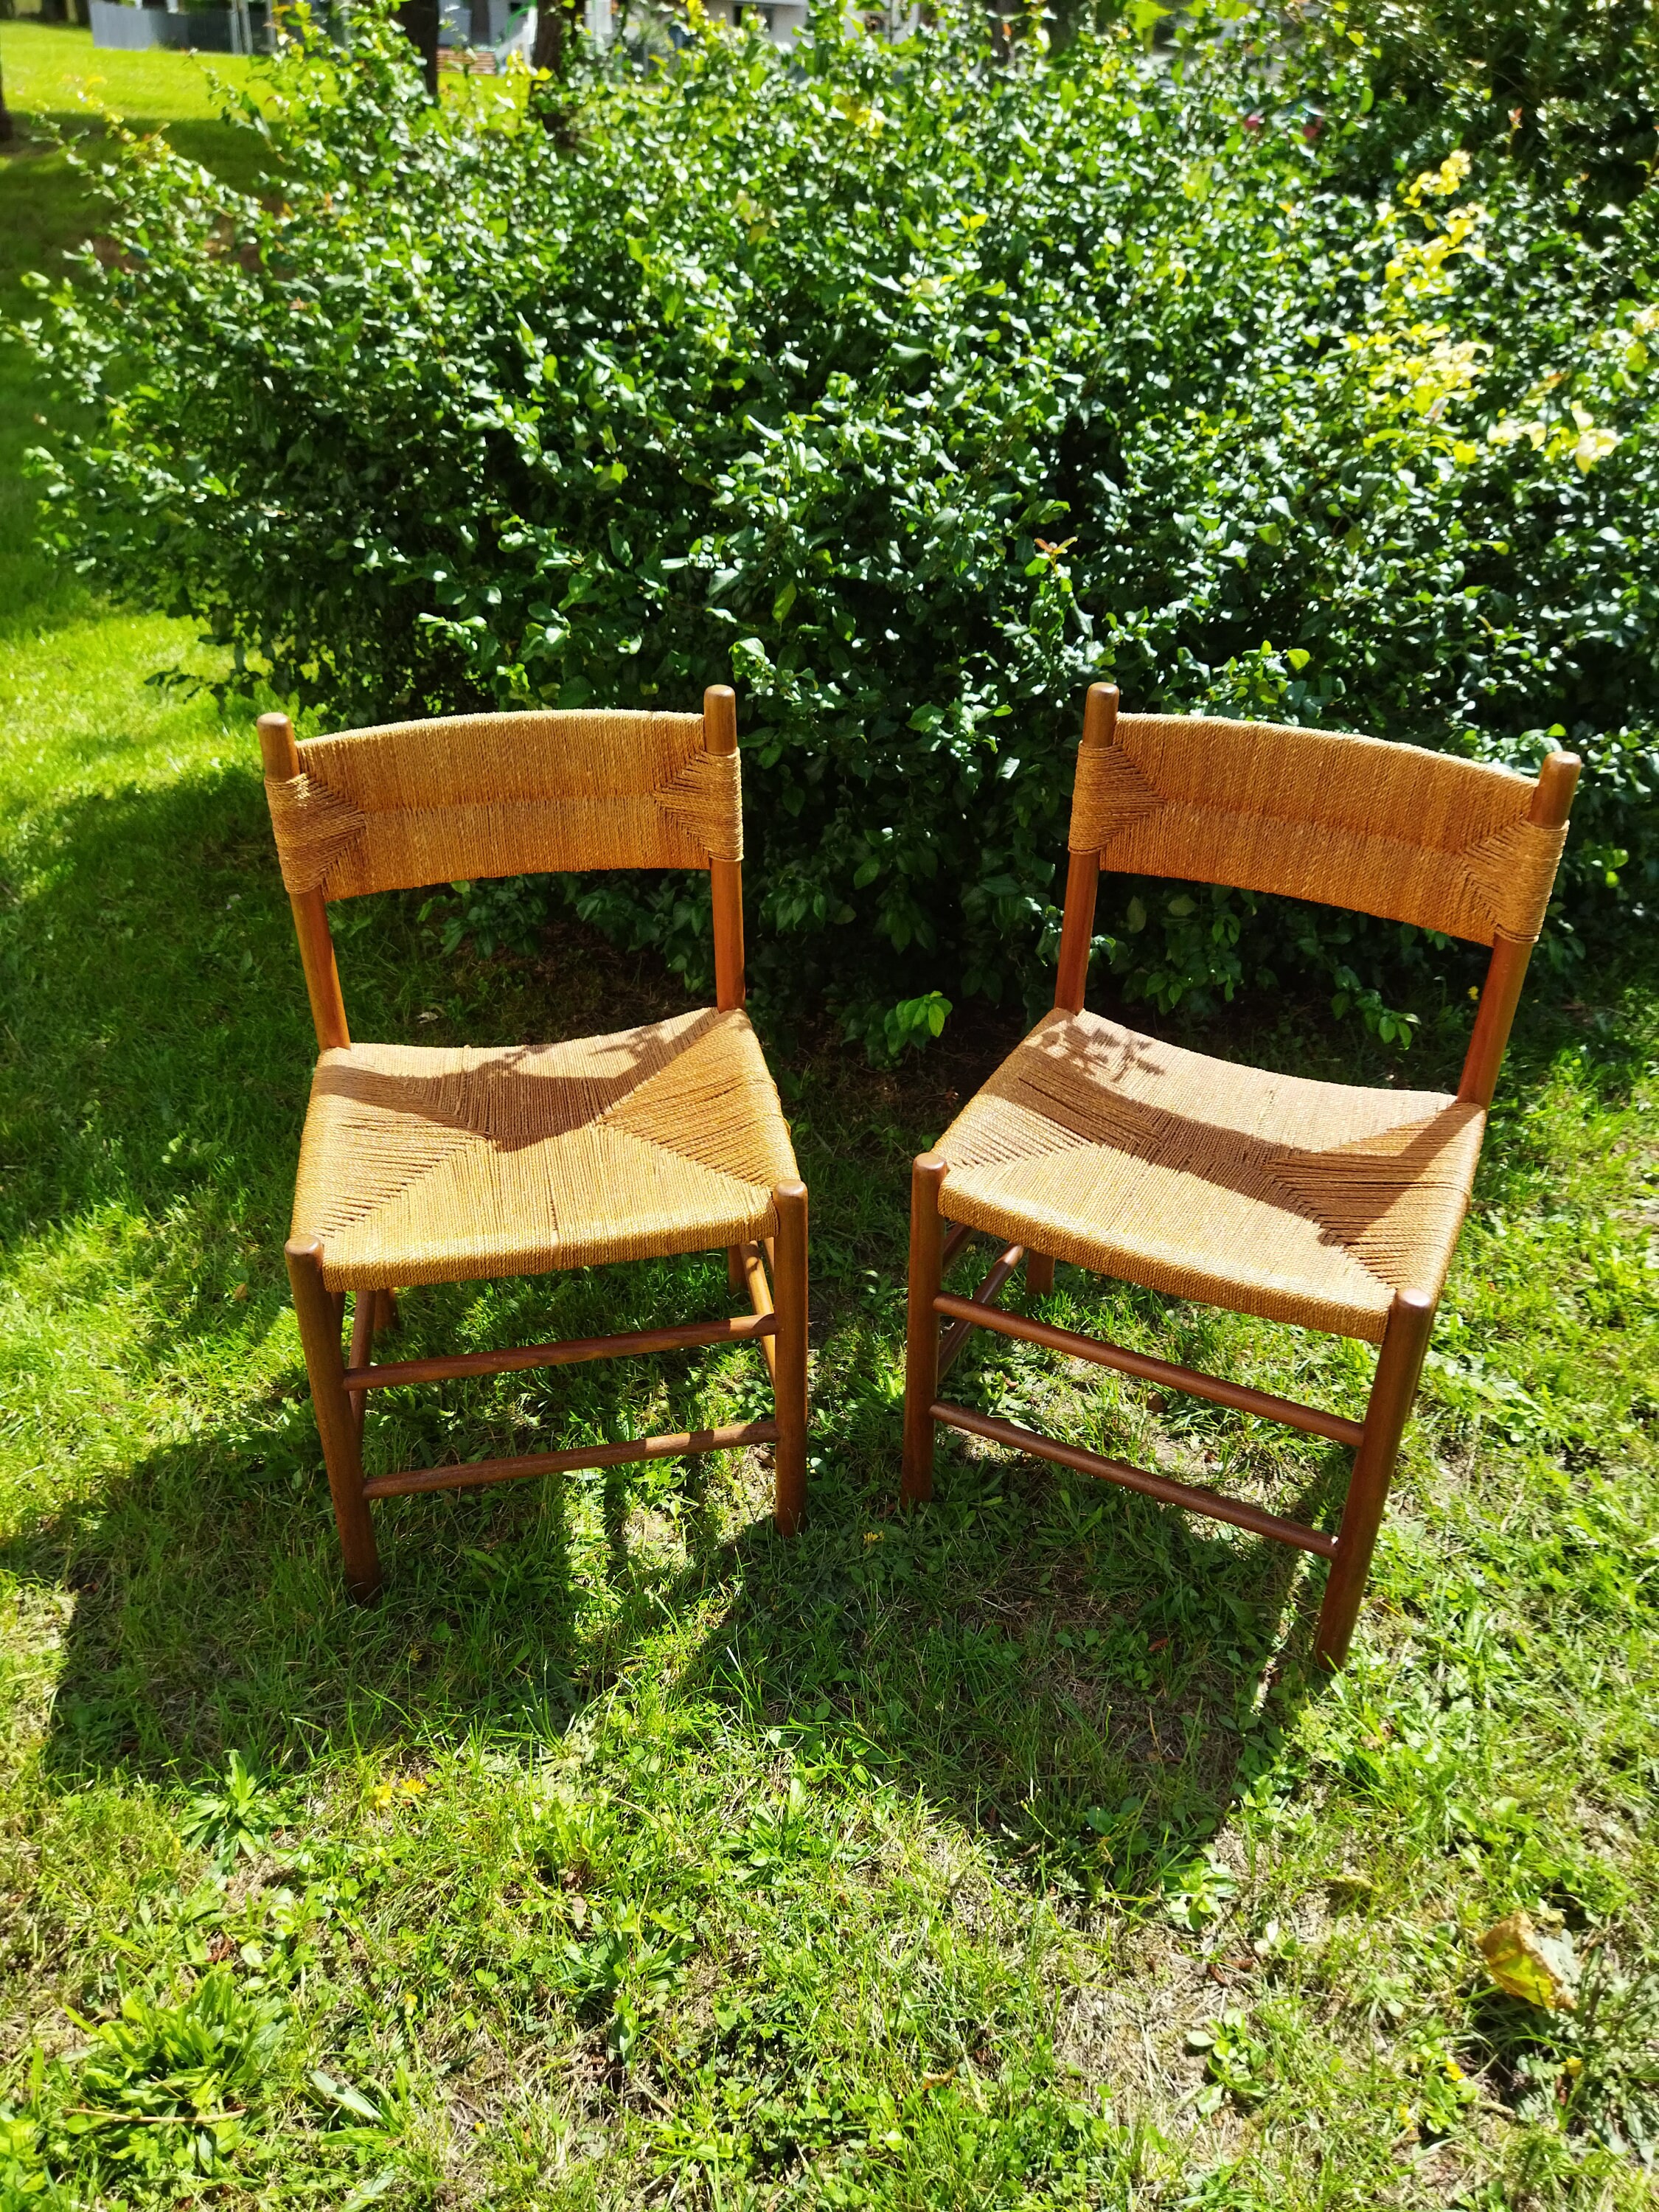 Straw and Pine Chair, Mountain Furniture by Charlotte Perriand, 1950s, Set  of 2